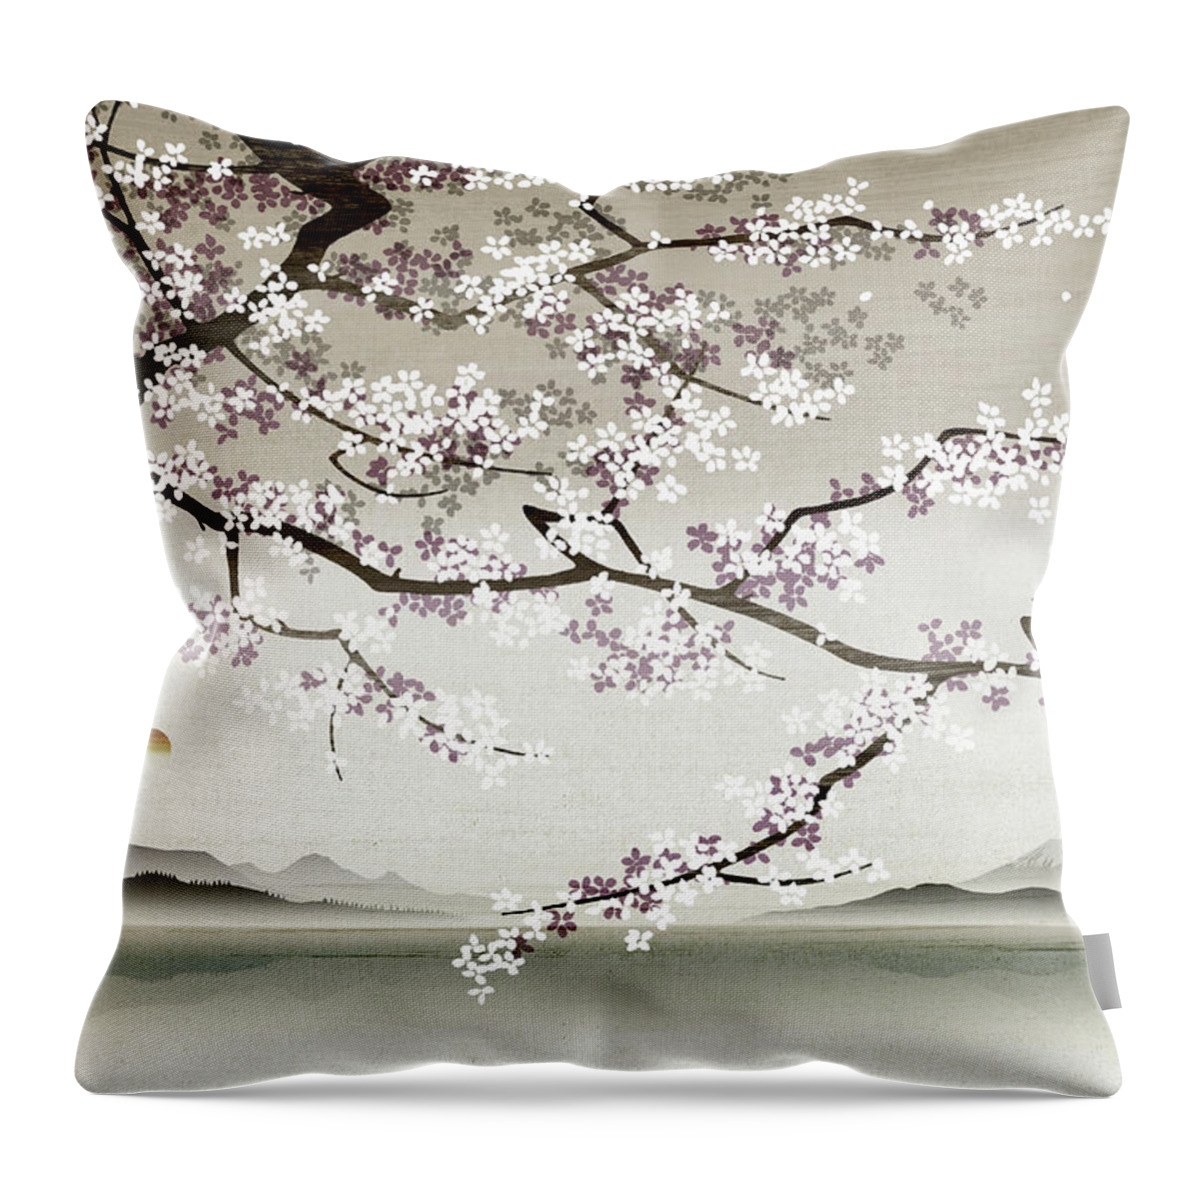 Asian Culture Throw Pillow featuring the photograph Flower Blossom In Asian Landscape by Ikon Ikon Images